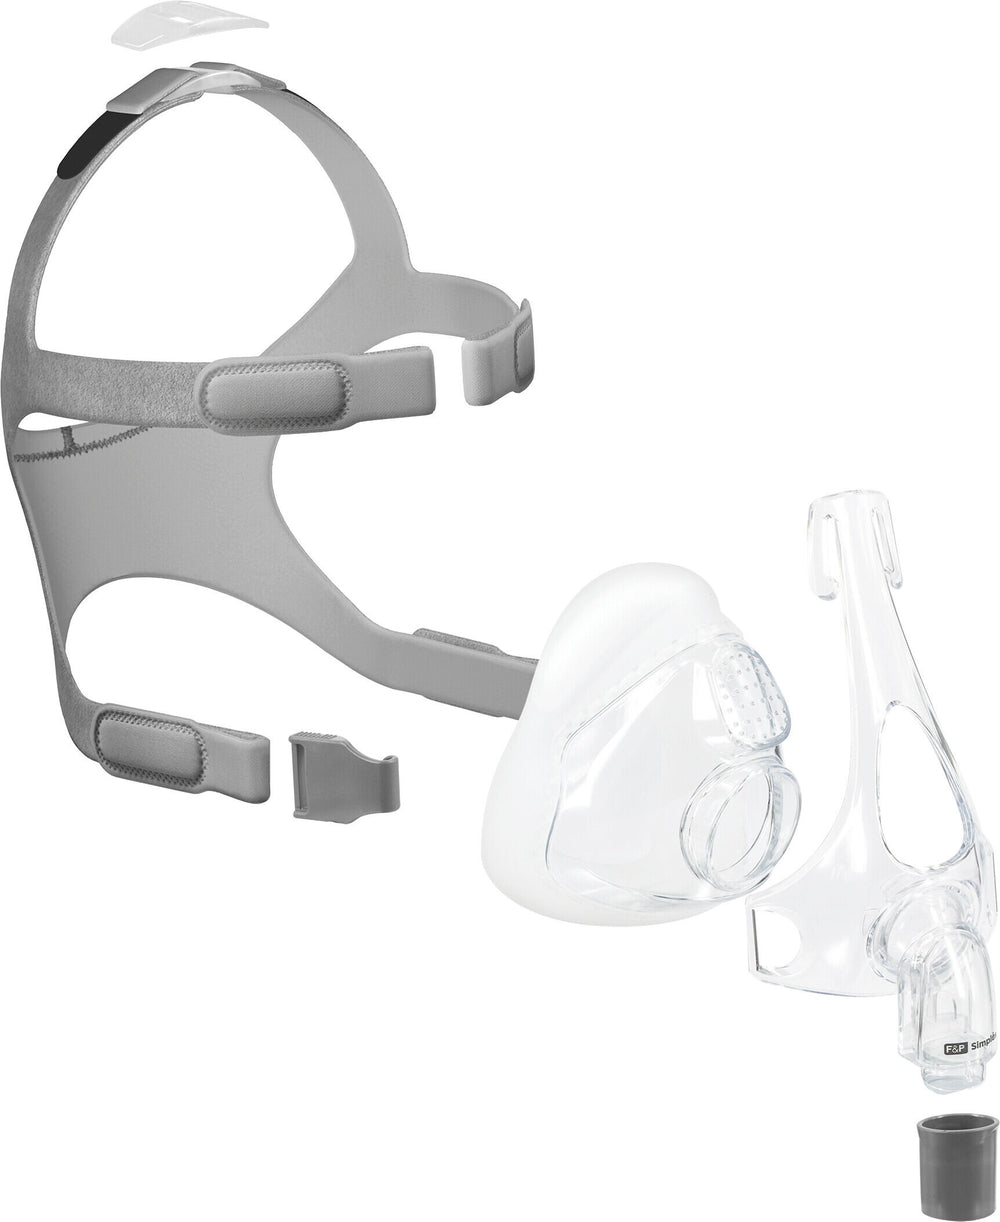 Fisher & Paykel Simplus Full Face Mask with Headgear - No Insurance Medical Supplies